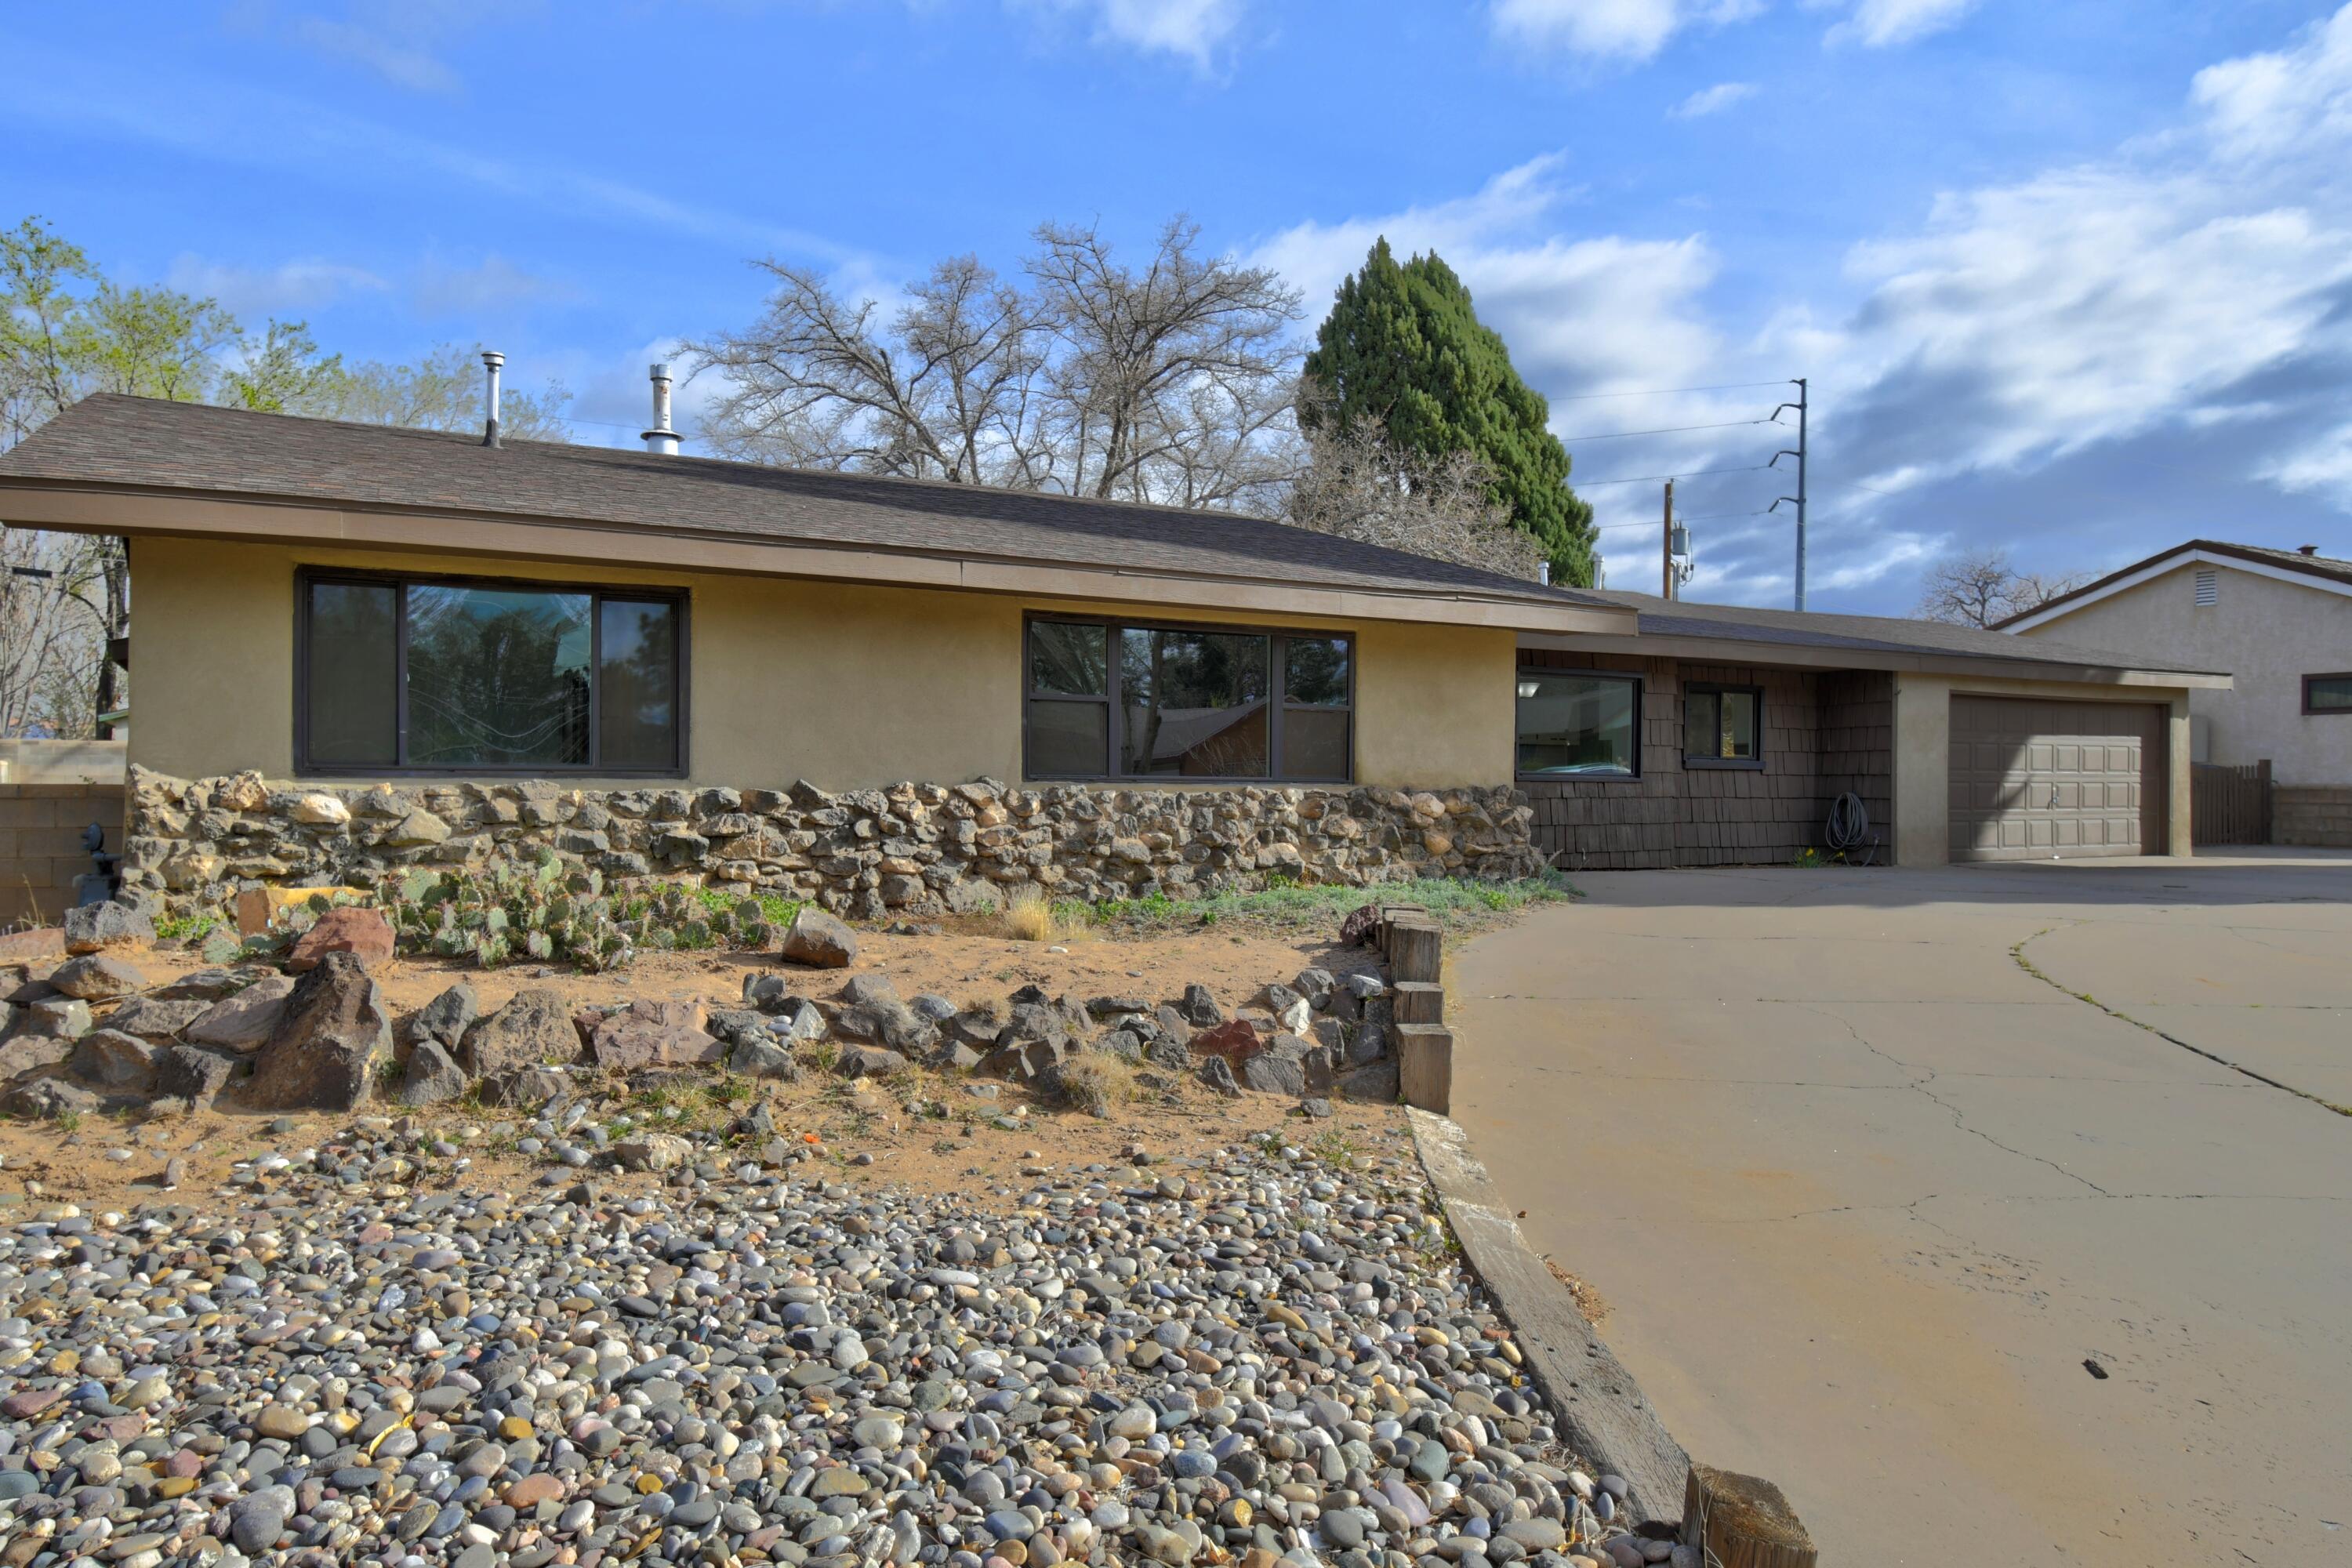 Situated on about 1/3 acre with backyard access, this large and updated floorplan is sure to please. 2 large living areas. 3 very spacious bedrooms, each with their own bath. Oversized garage with workshop area. Great location- minutes to I-25, schools, shopping, and restaurants!